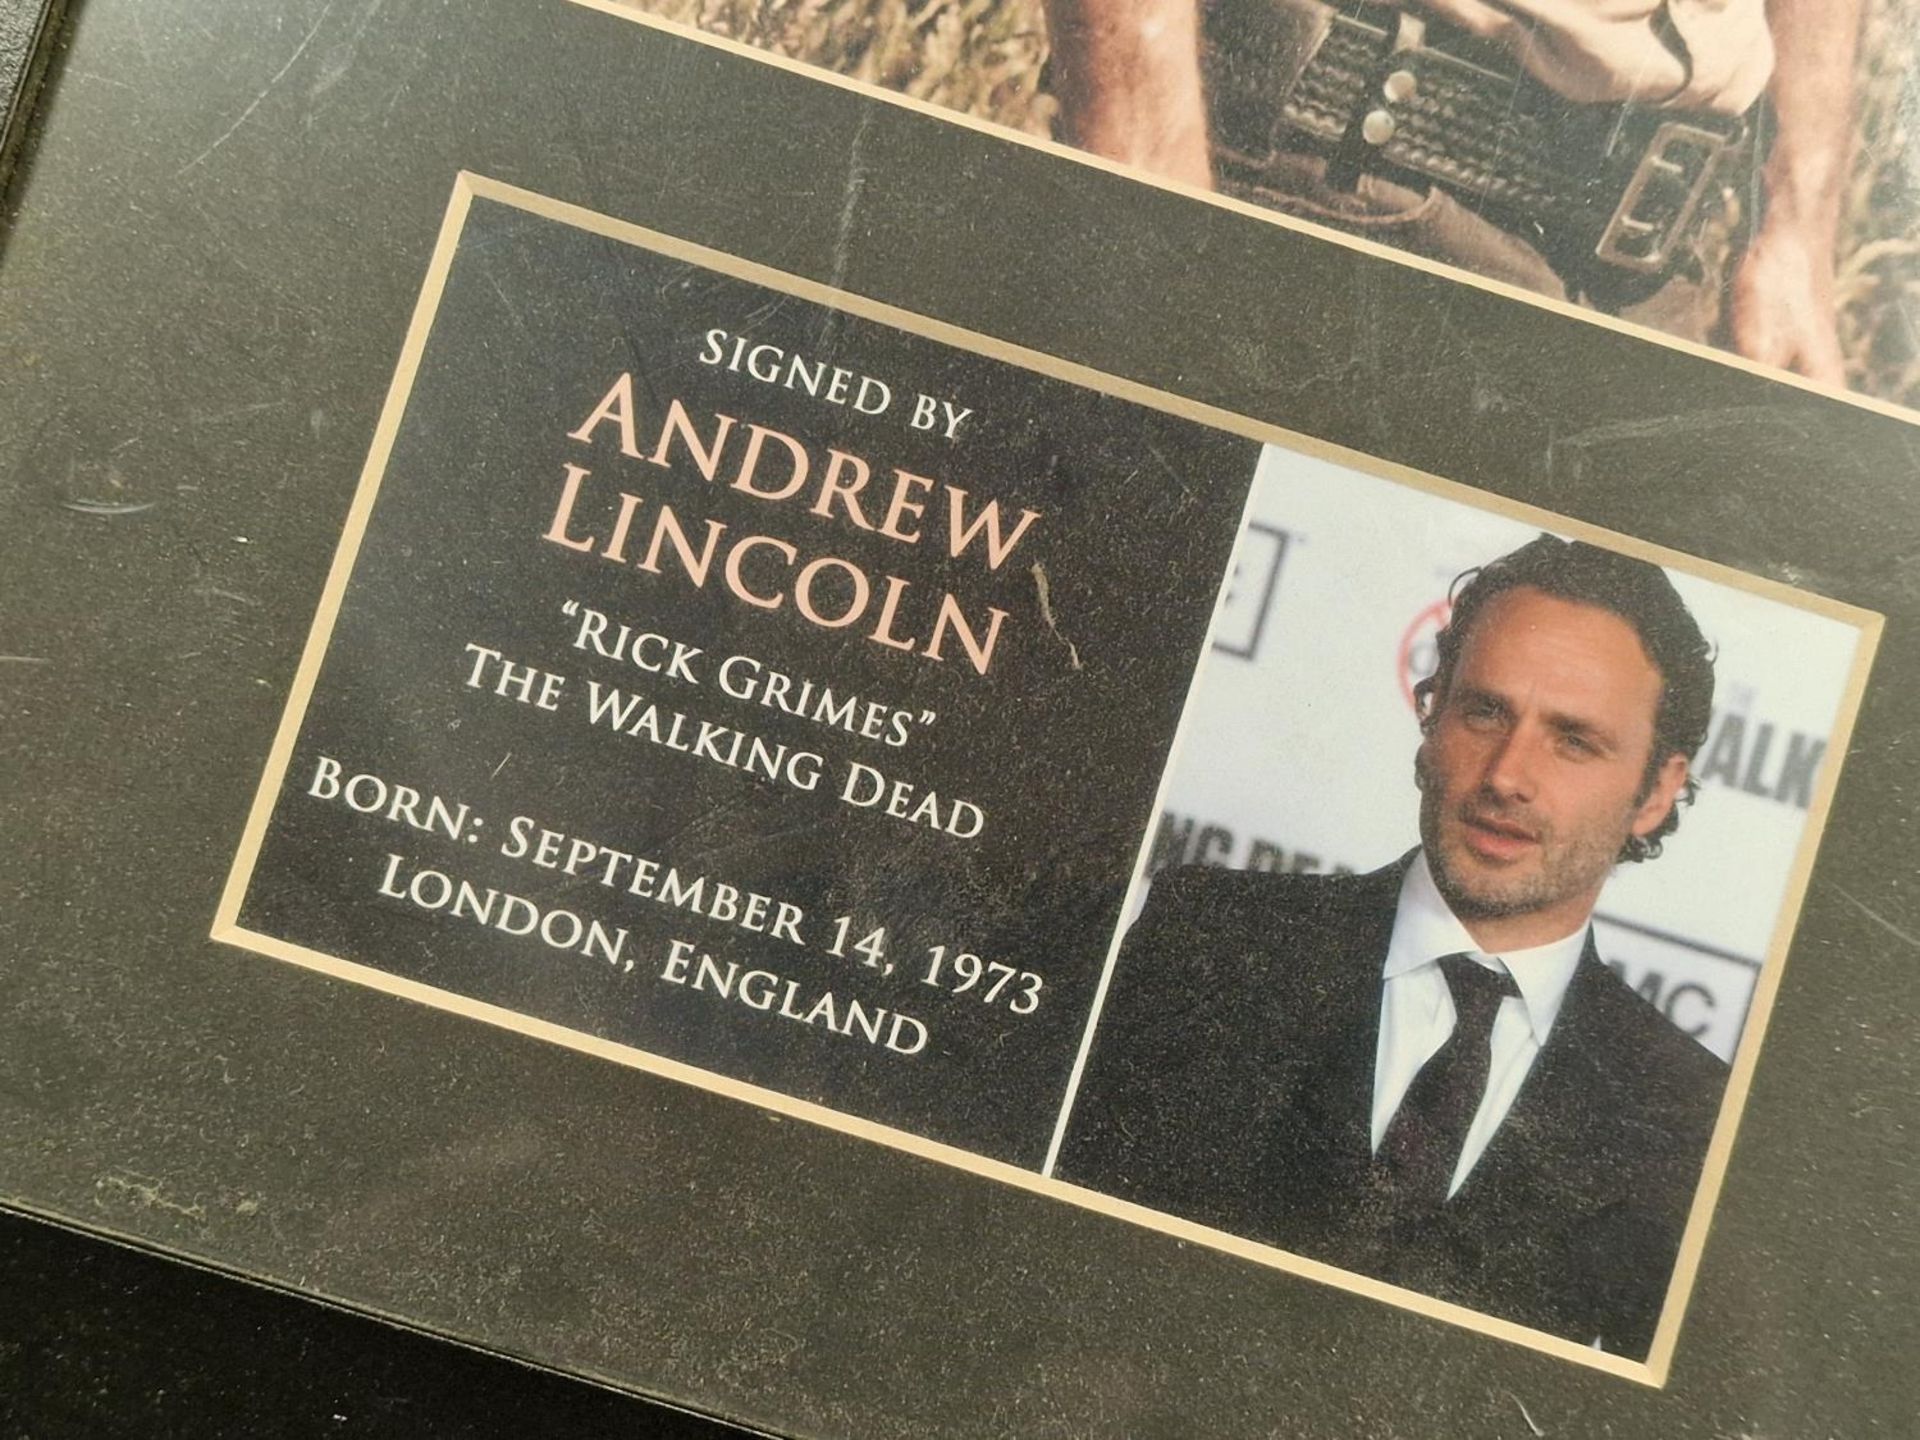 Framed unauthenticated Andrew Lincoln signed photograph 34x25cm. - Image 3 of 3